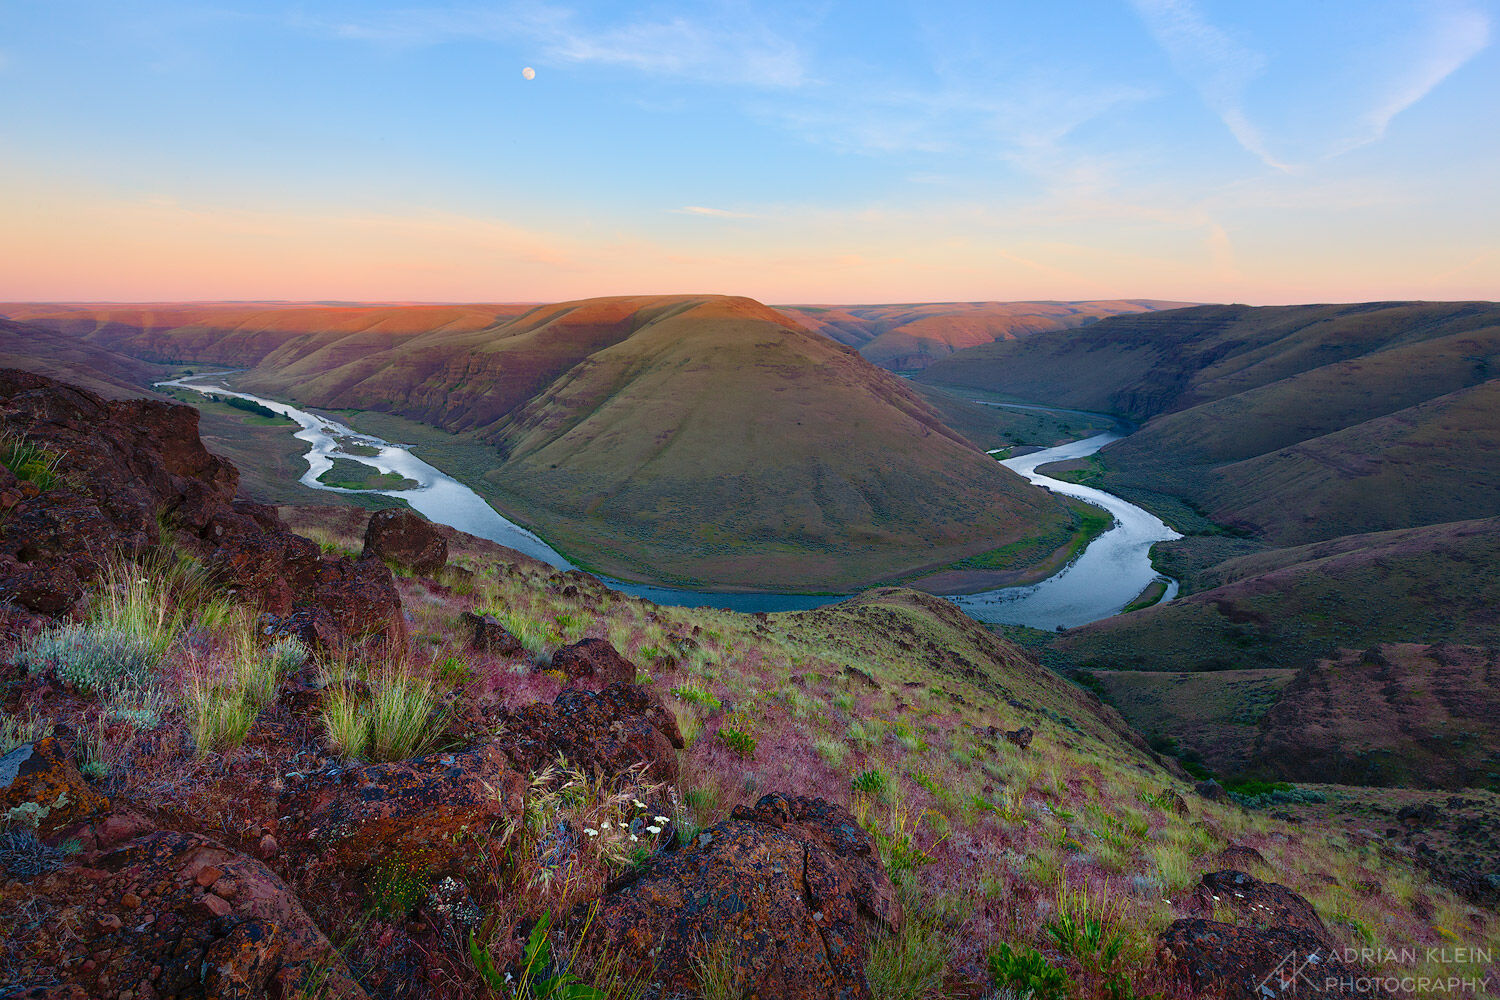 Looking down at the John Day river that winds and bends through the high desert of Eastern and Central Oregon. Limited Edition...